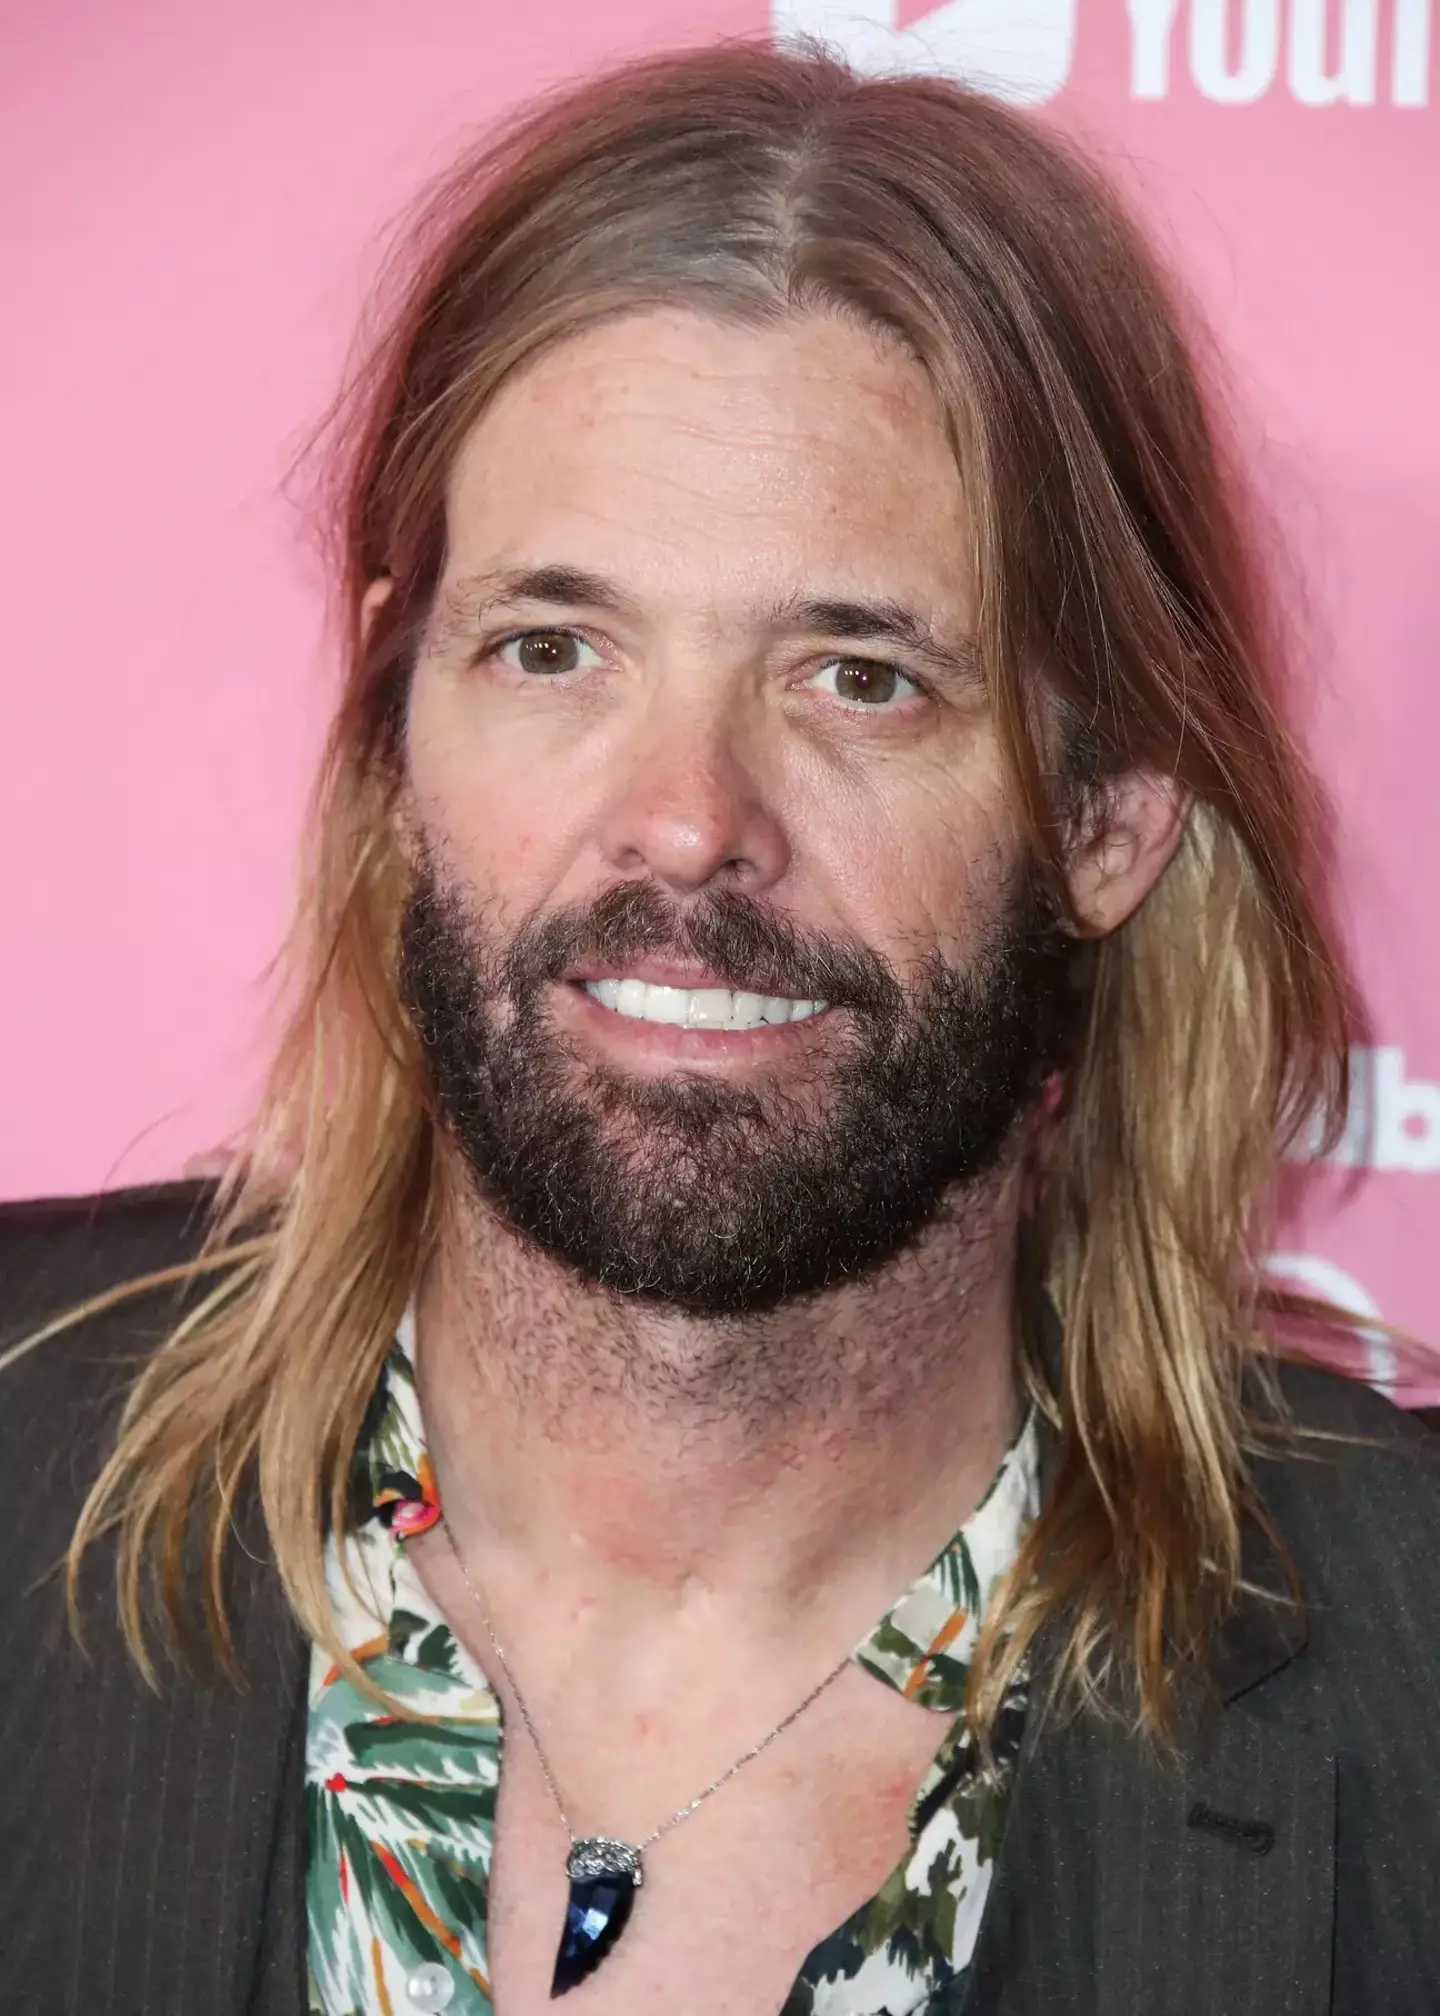 Foo Fighters drummer Taylor Hawkins sadly passed away in March.